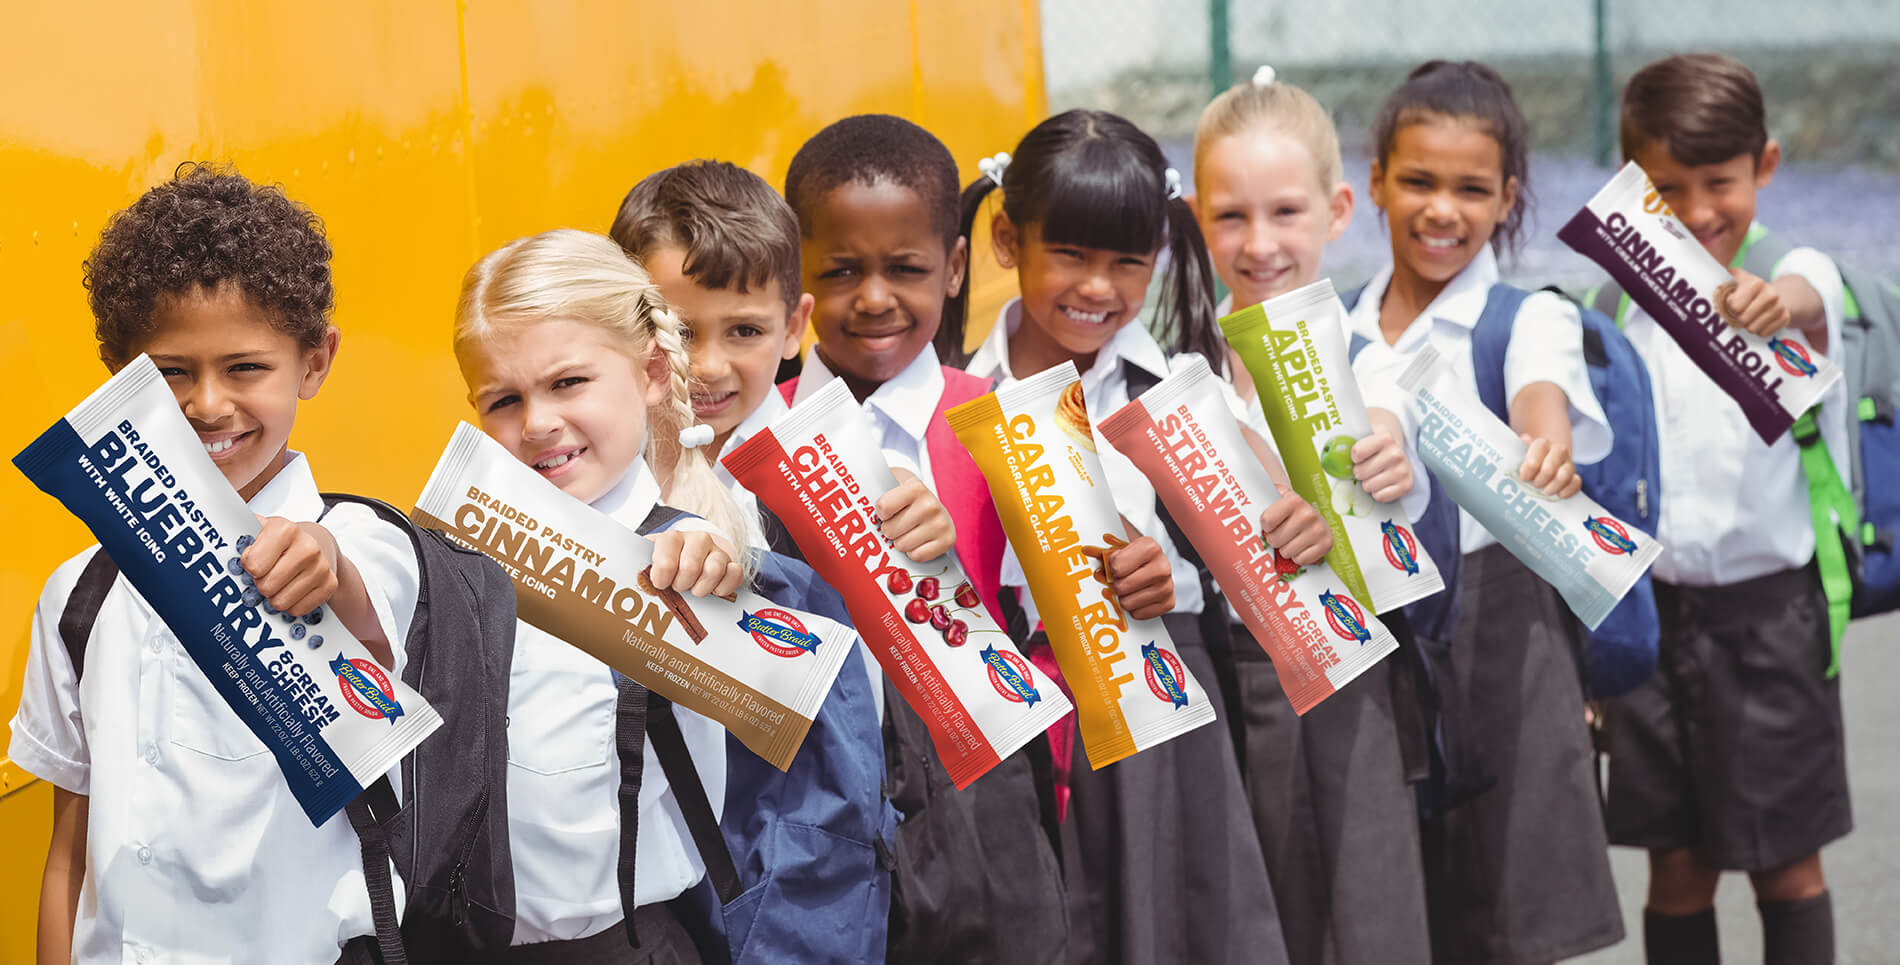 Find a Dealer - Group of school children in front of bus holding Butter Braid Pastry packages